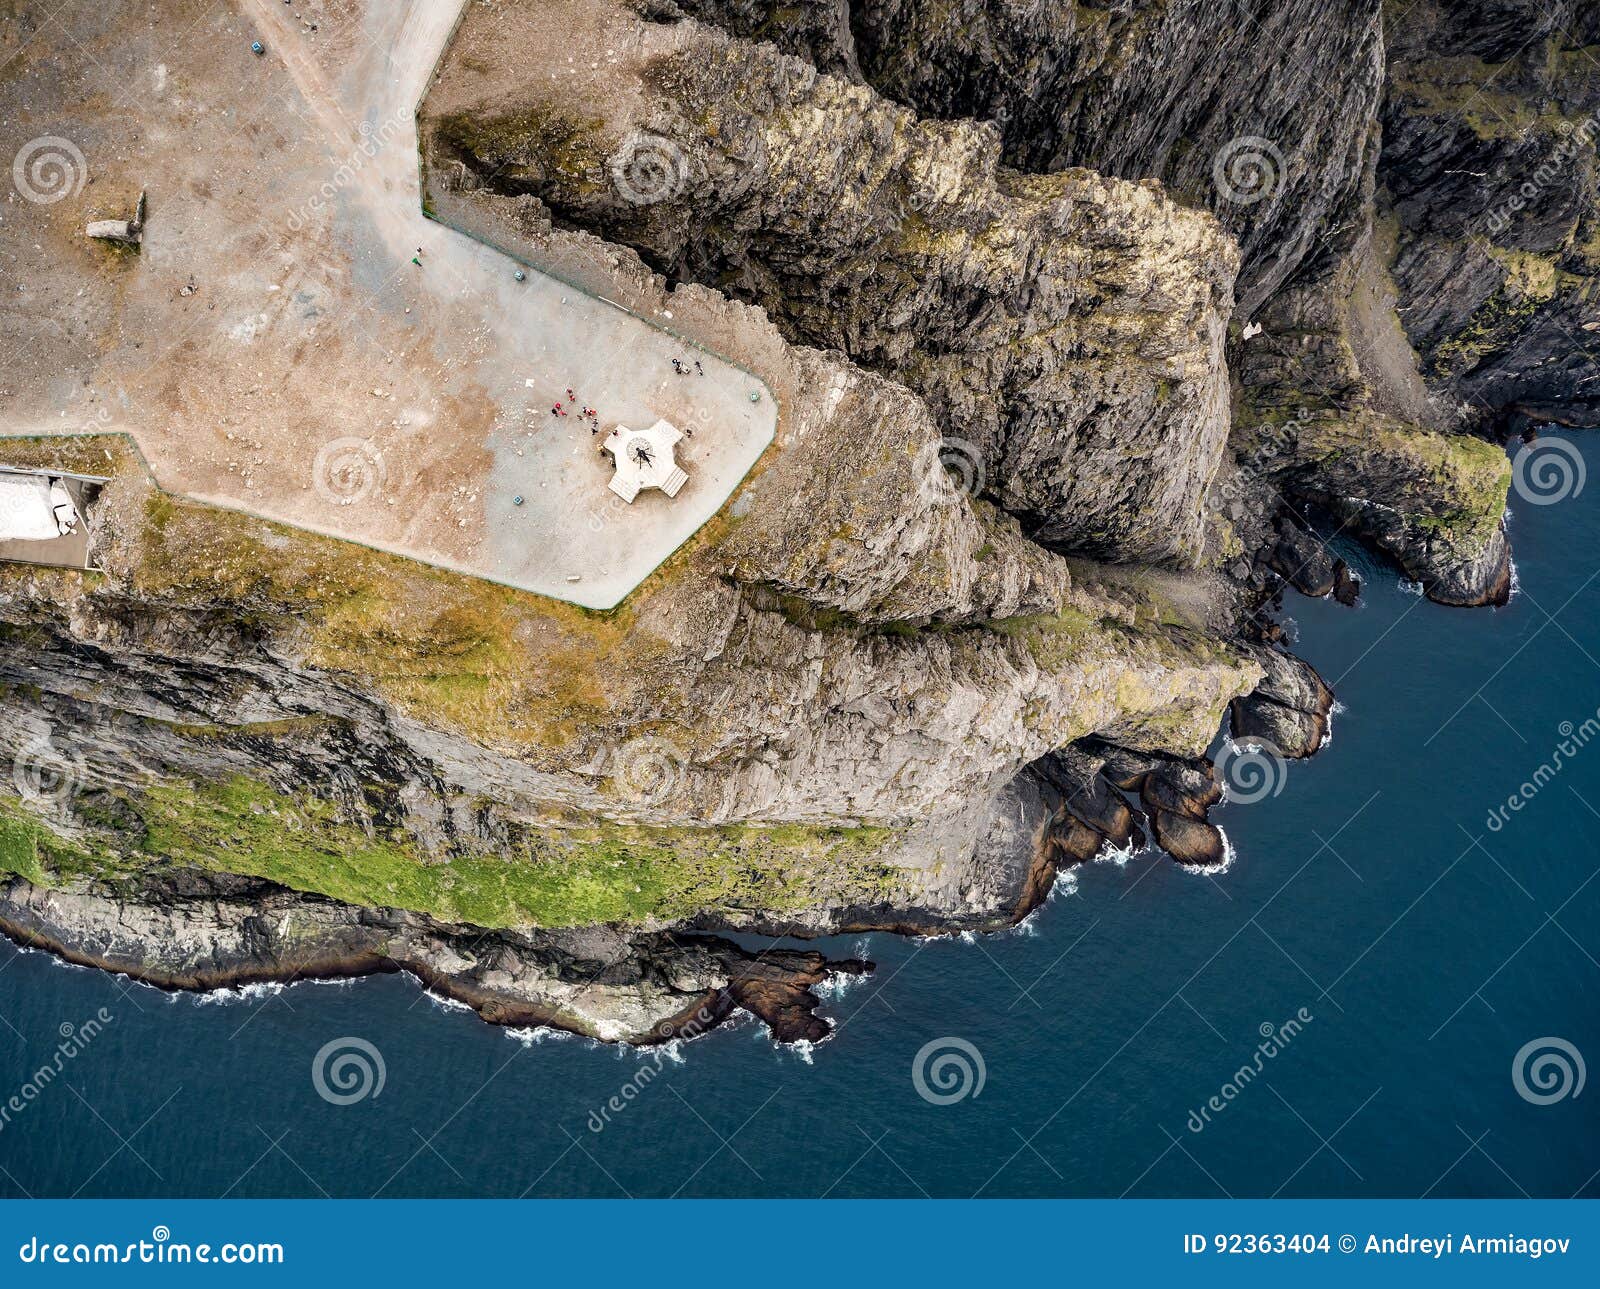 north cape nordkapp aerial photography,